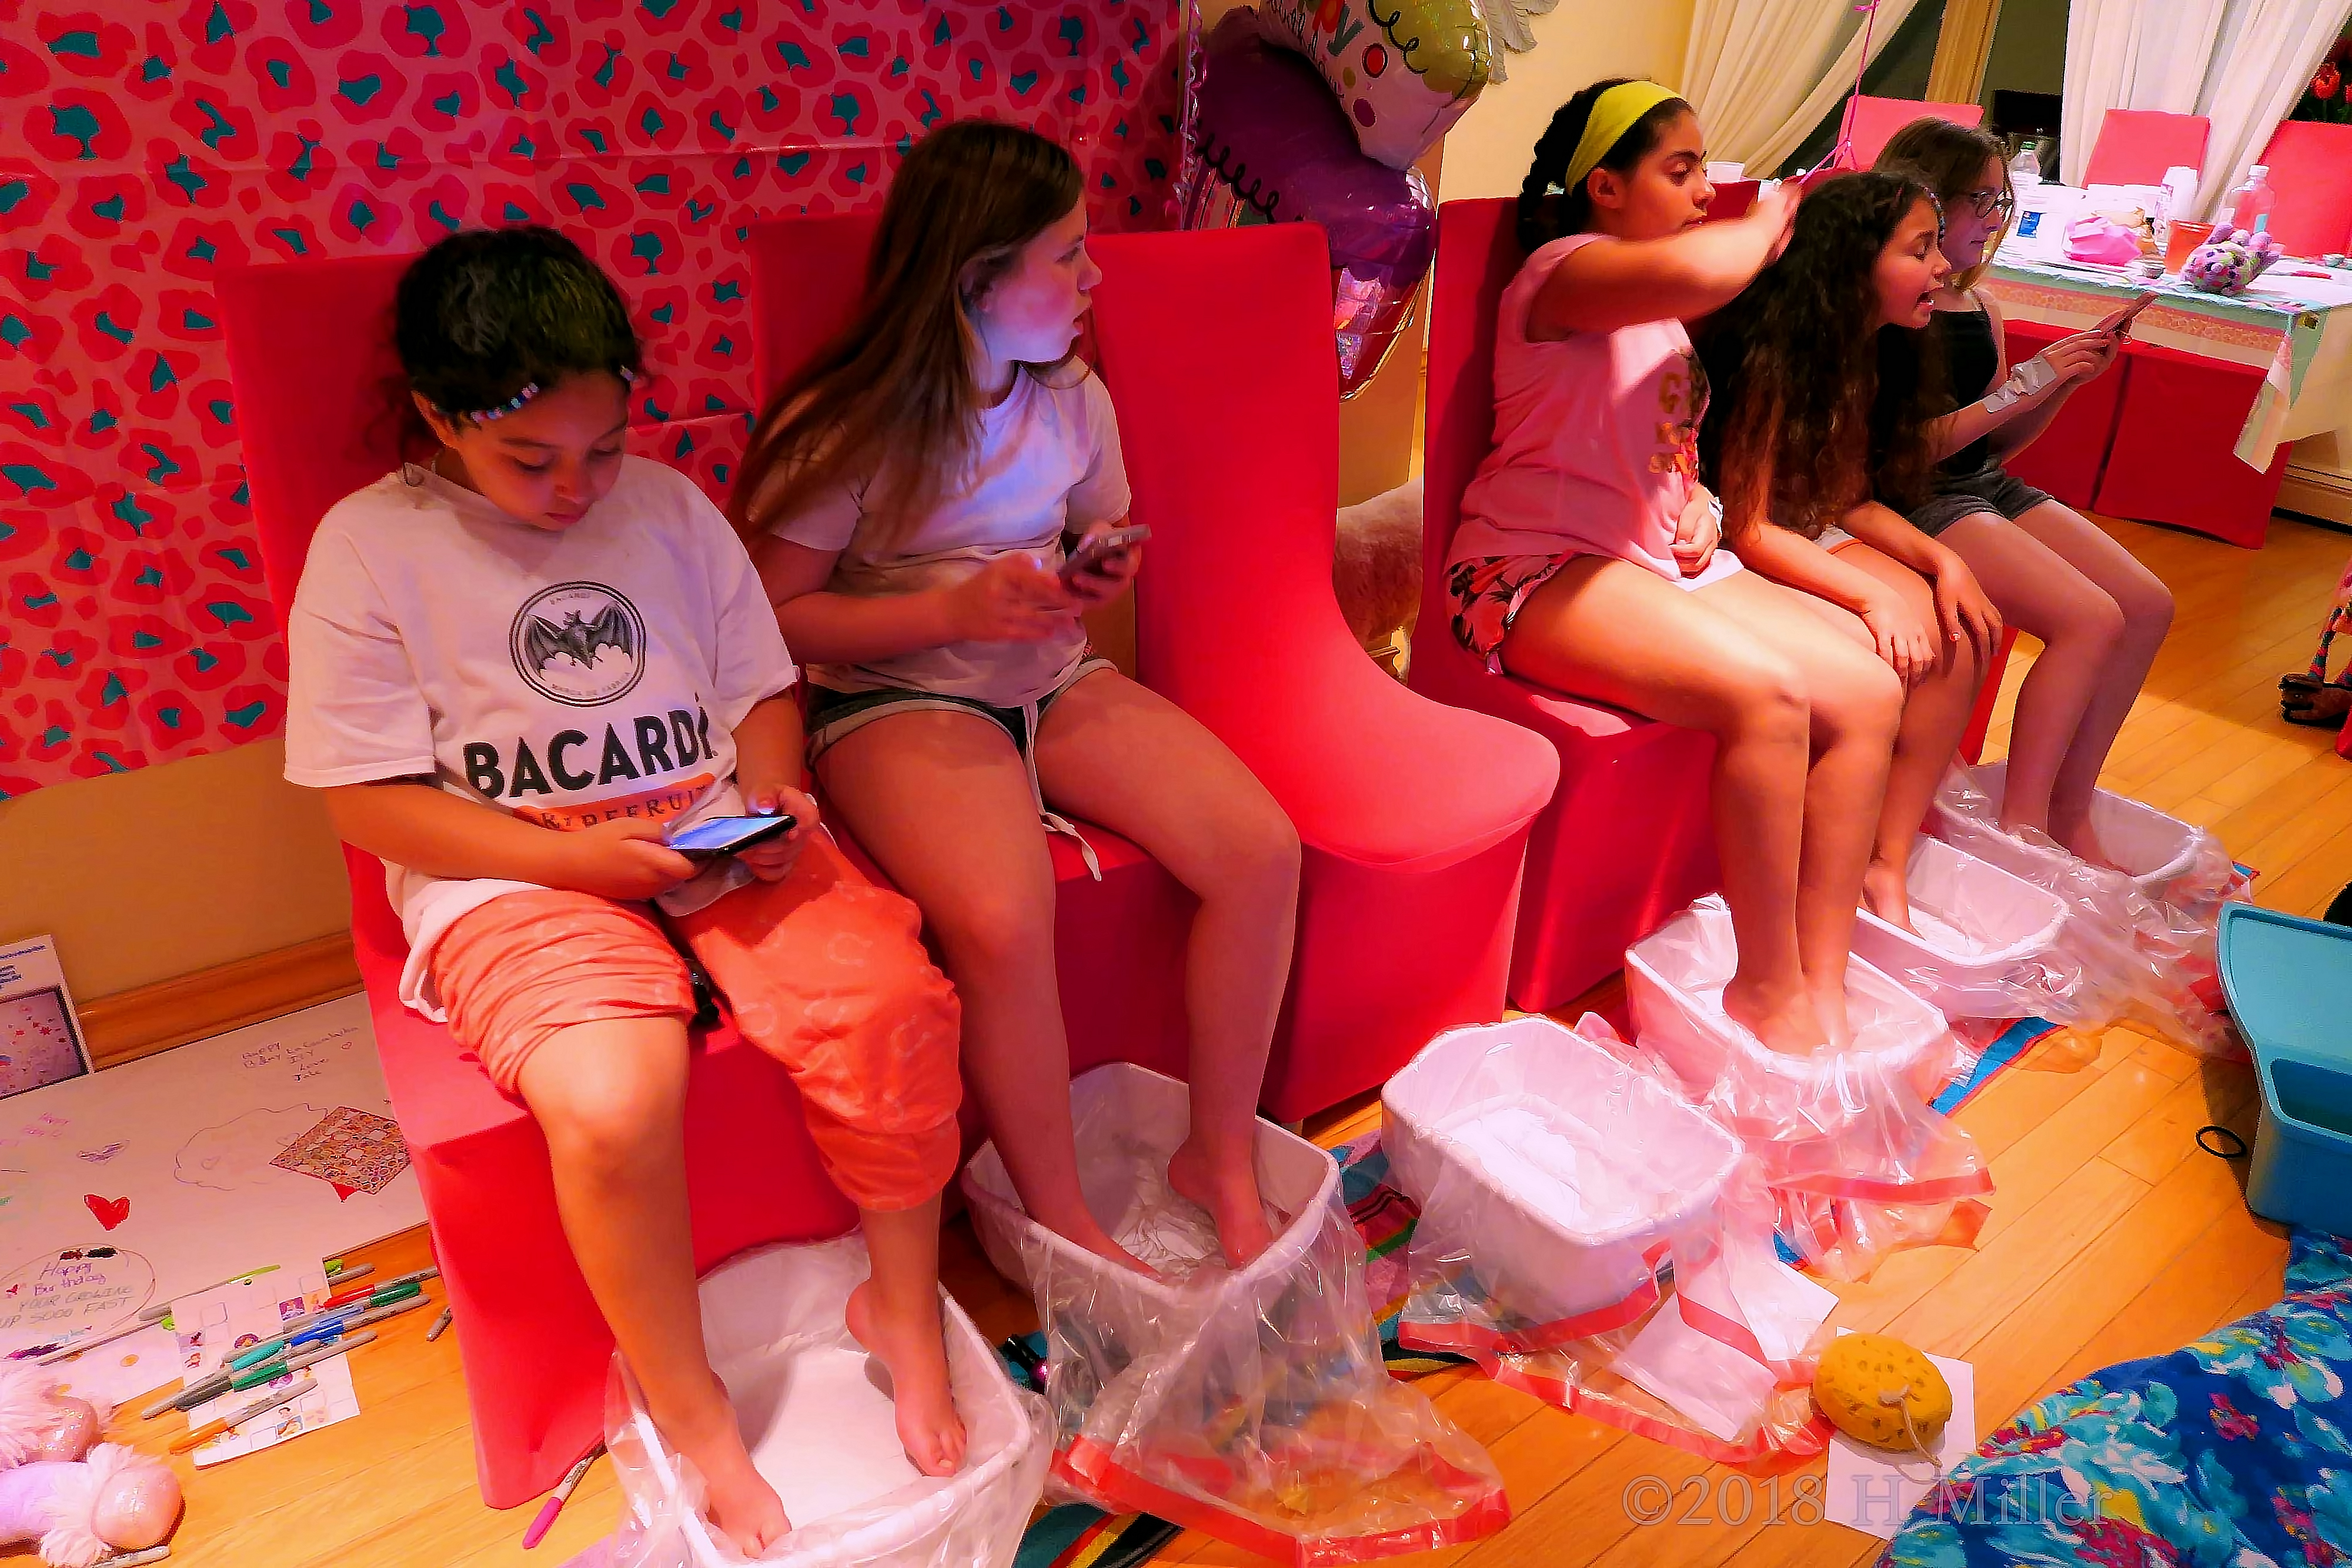 Enjoying And Relaxing During The Kids Spa Pedicure Activity! 